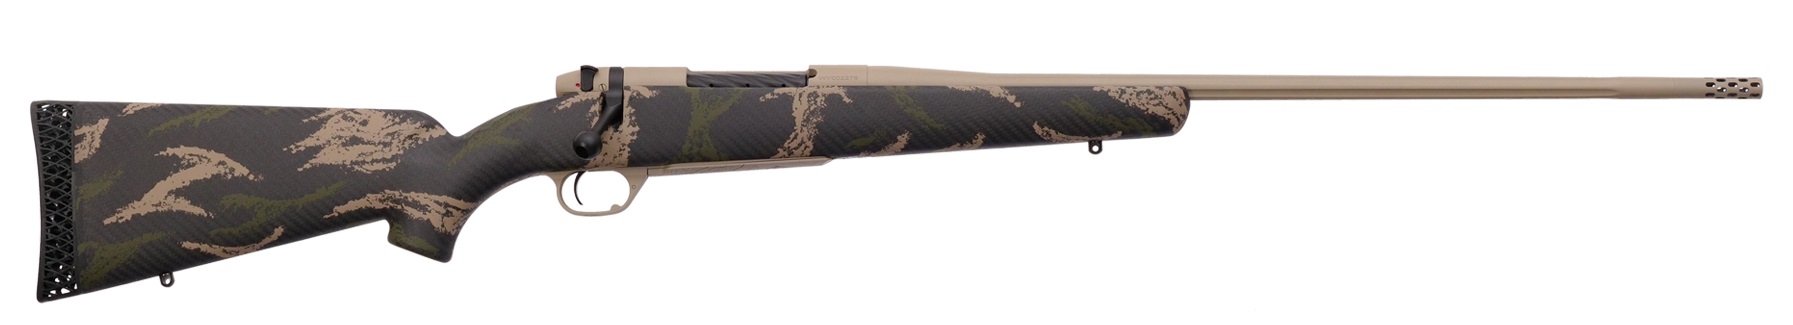 A Weatherby rifle chambered for 280 Ackley Improved.